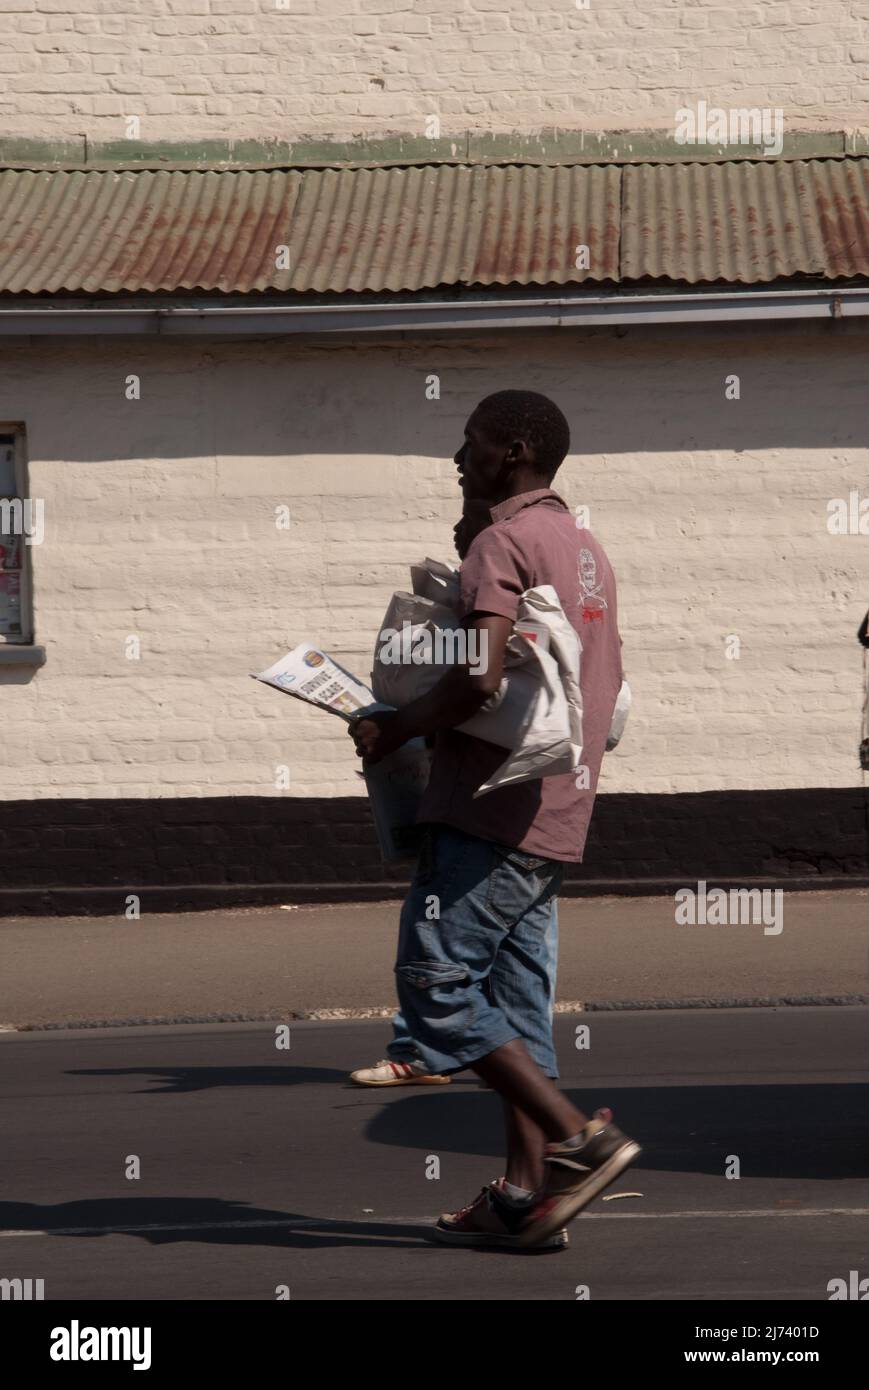 Boys selling newspapers, outside an Old Administrative Building, Blantyre, Malawi, Africa. Blantyre (named after David Livingstone's birthplace in Sco Stock Photo